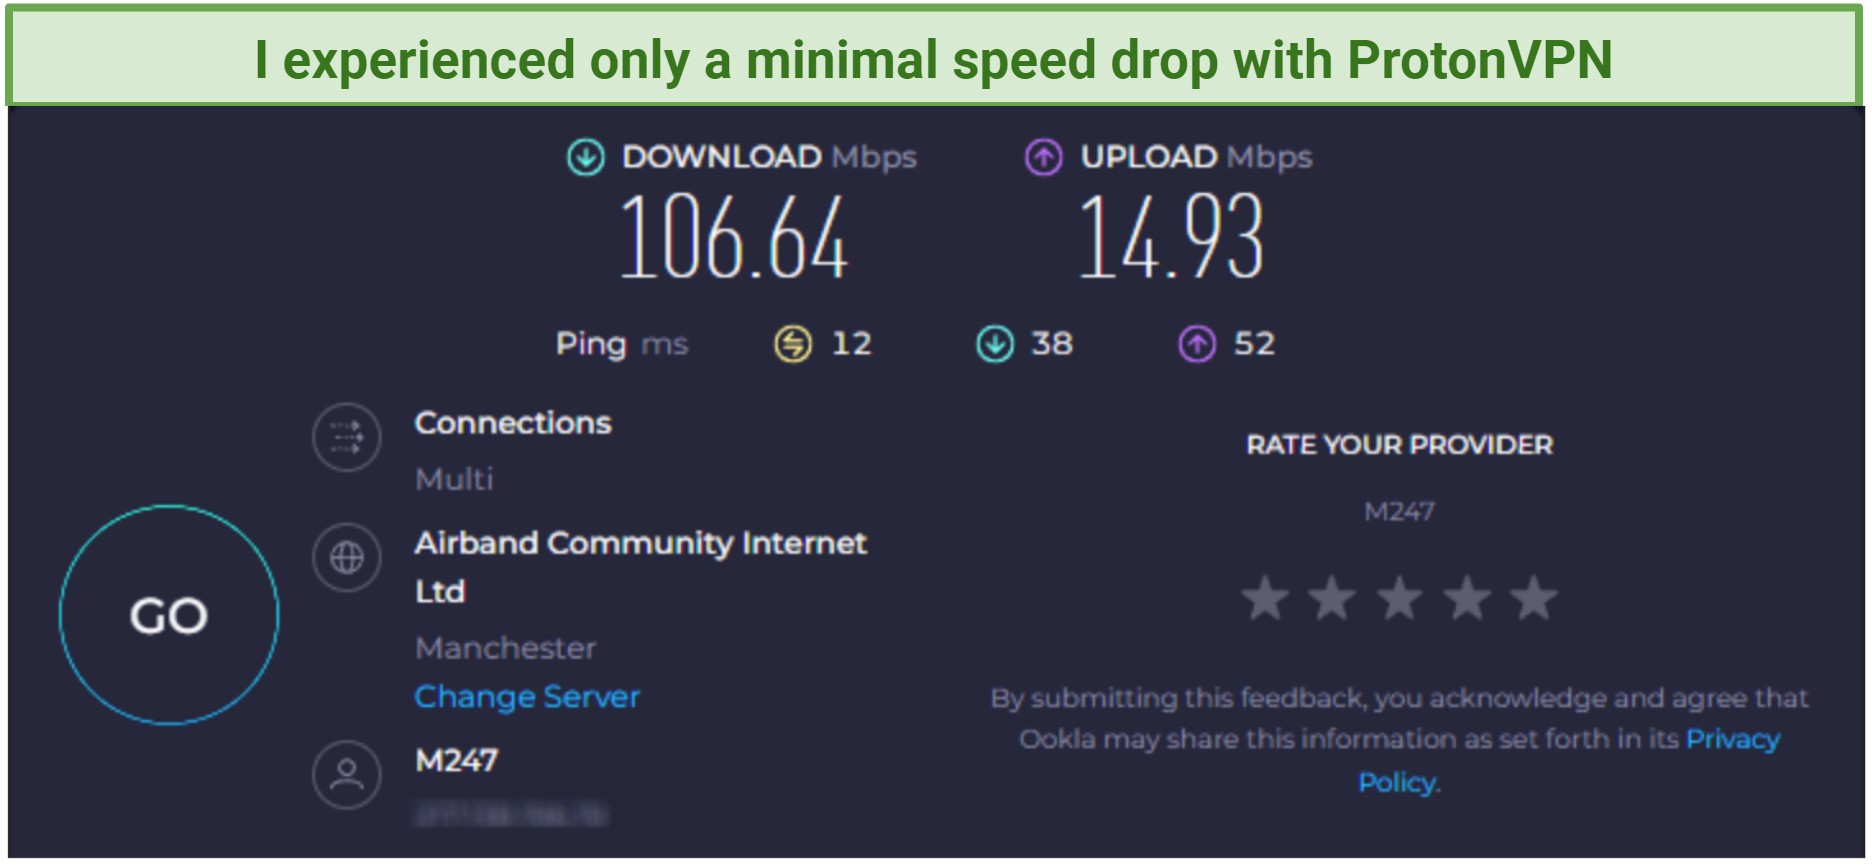 Screenshot of the ProtonVPN speed test results with WireGuard protocol